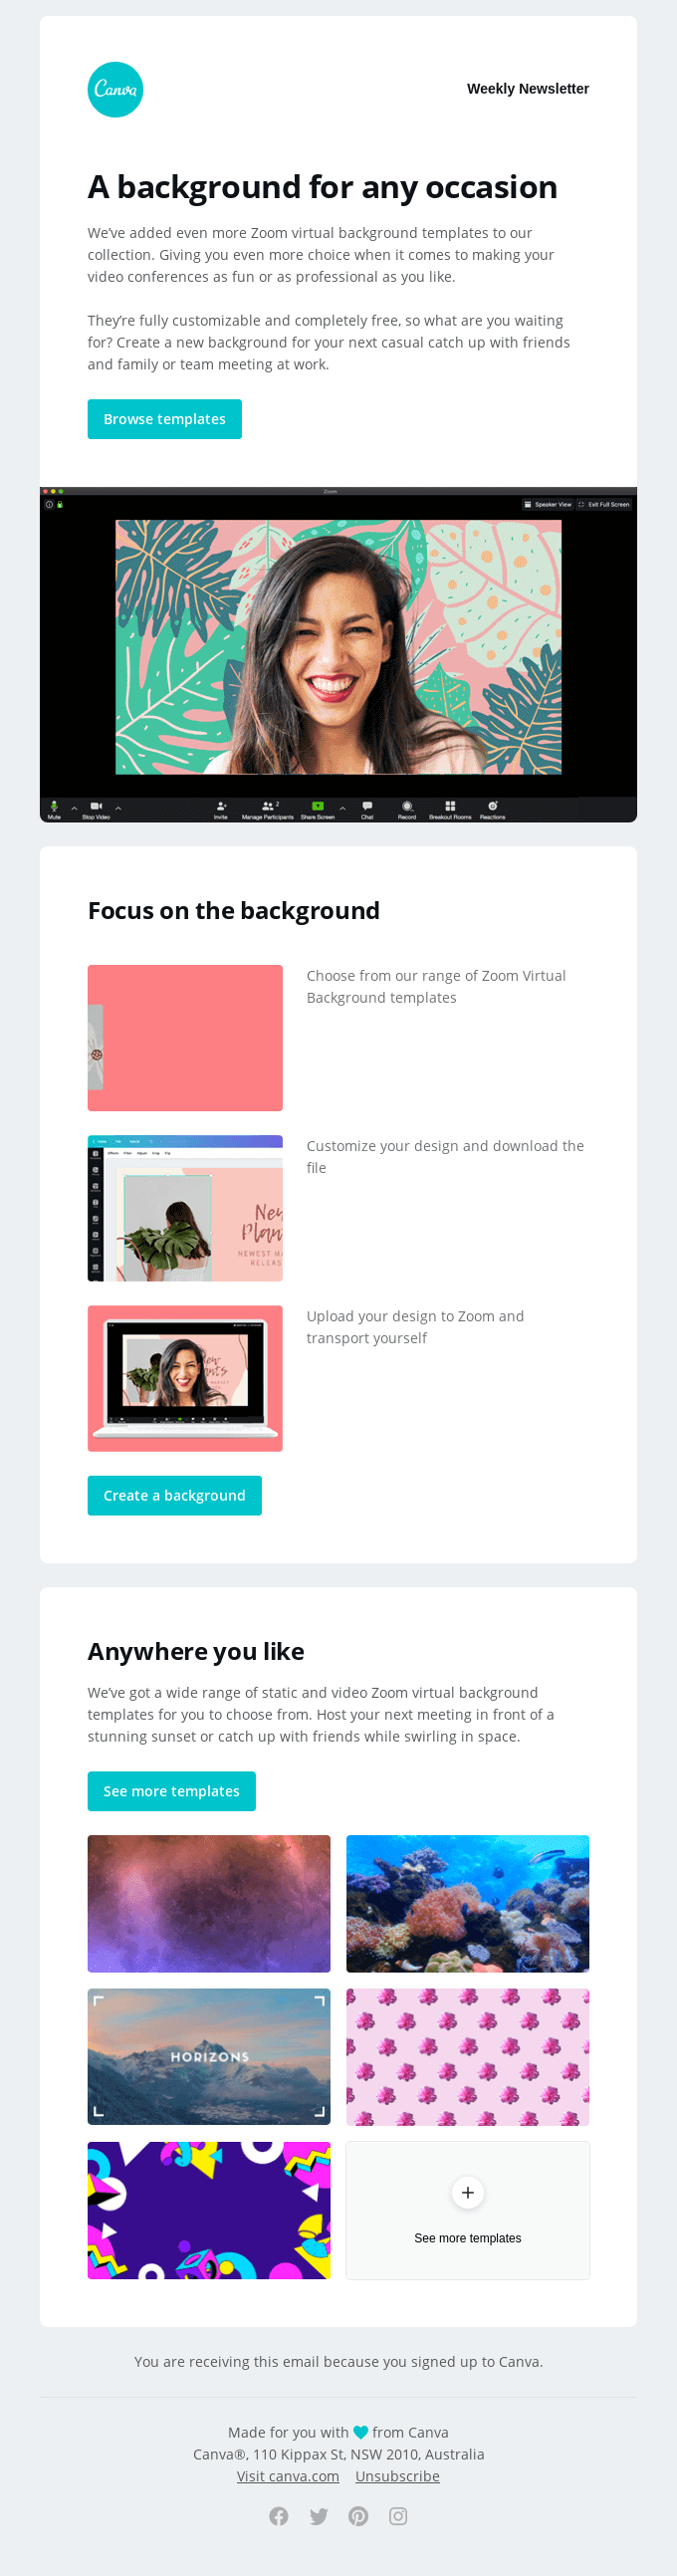 re-engagement email template by Canva